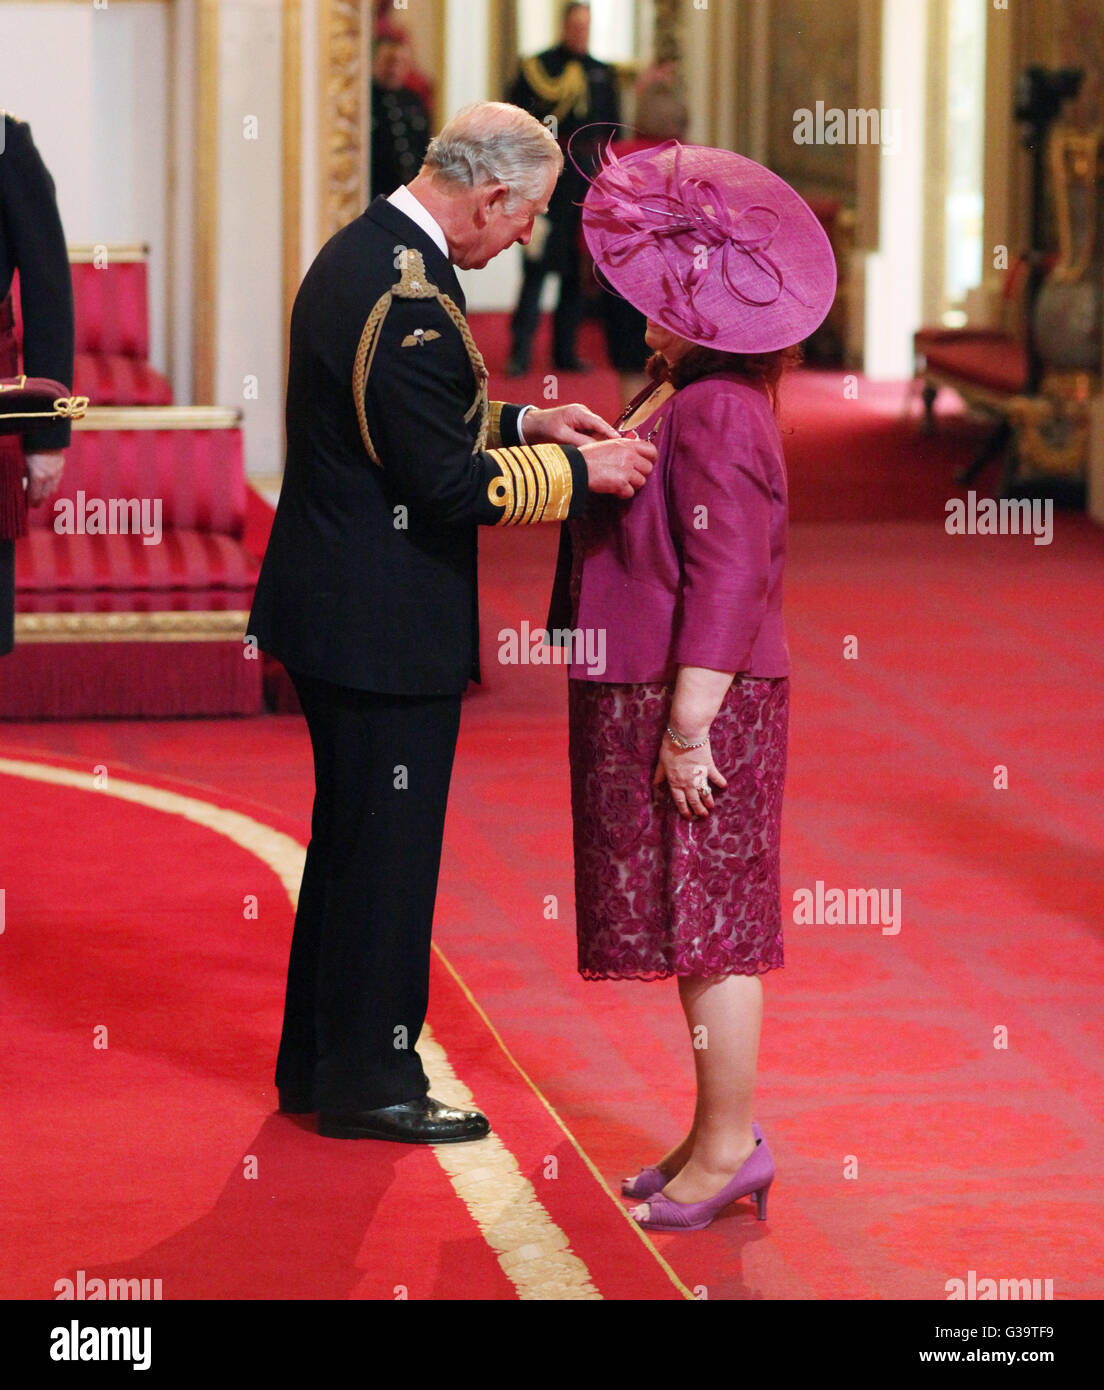 Mrs Janet Burns from Great Wyrley, receives an MBE (Member of the Order of the British Empire) by the Prince of Wales during an investiture ceremony at Buckingham Palace, London. Stock Photo